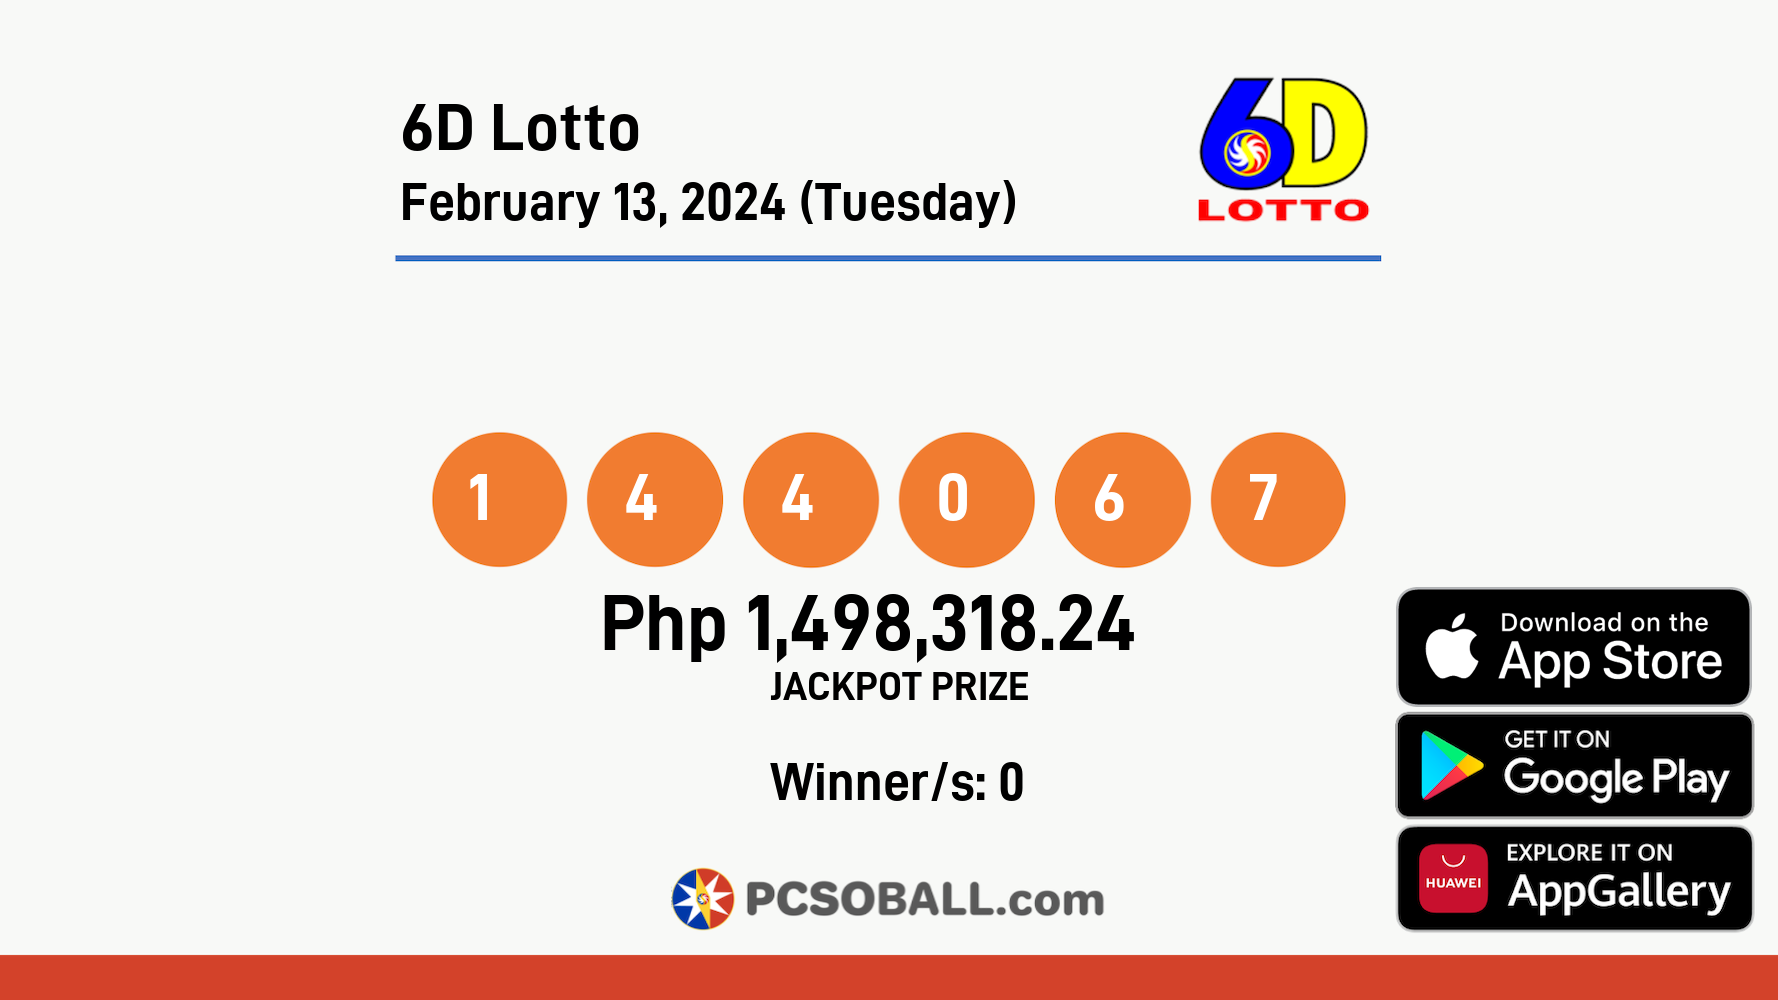 6D Lotto February 13, 2024 (Tuesday) Result